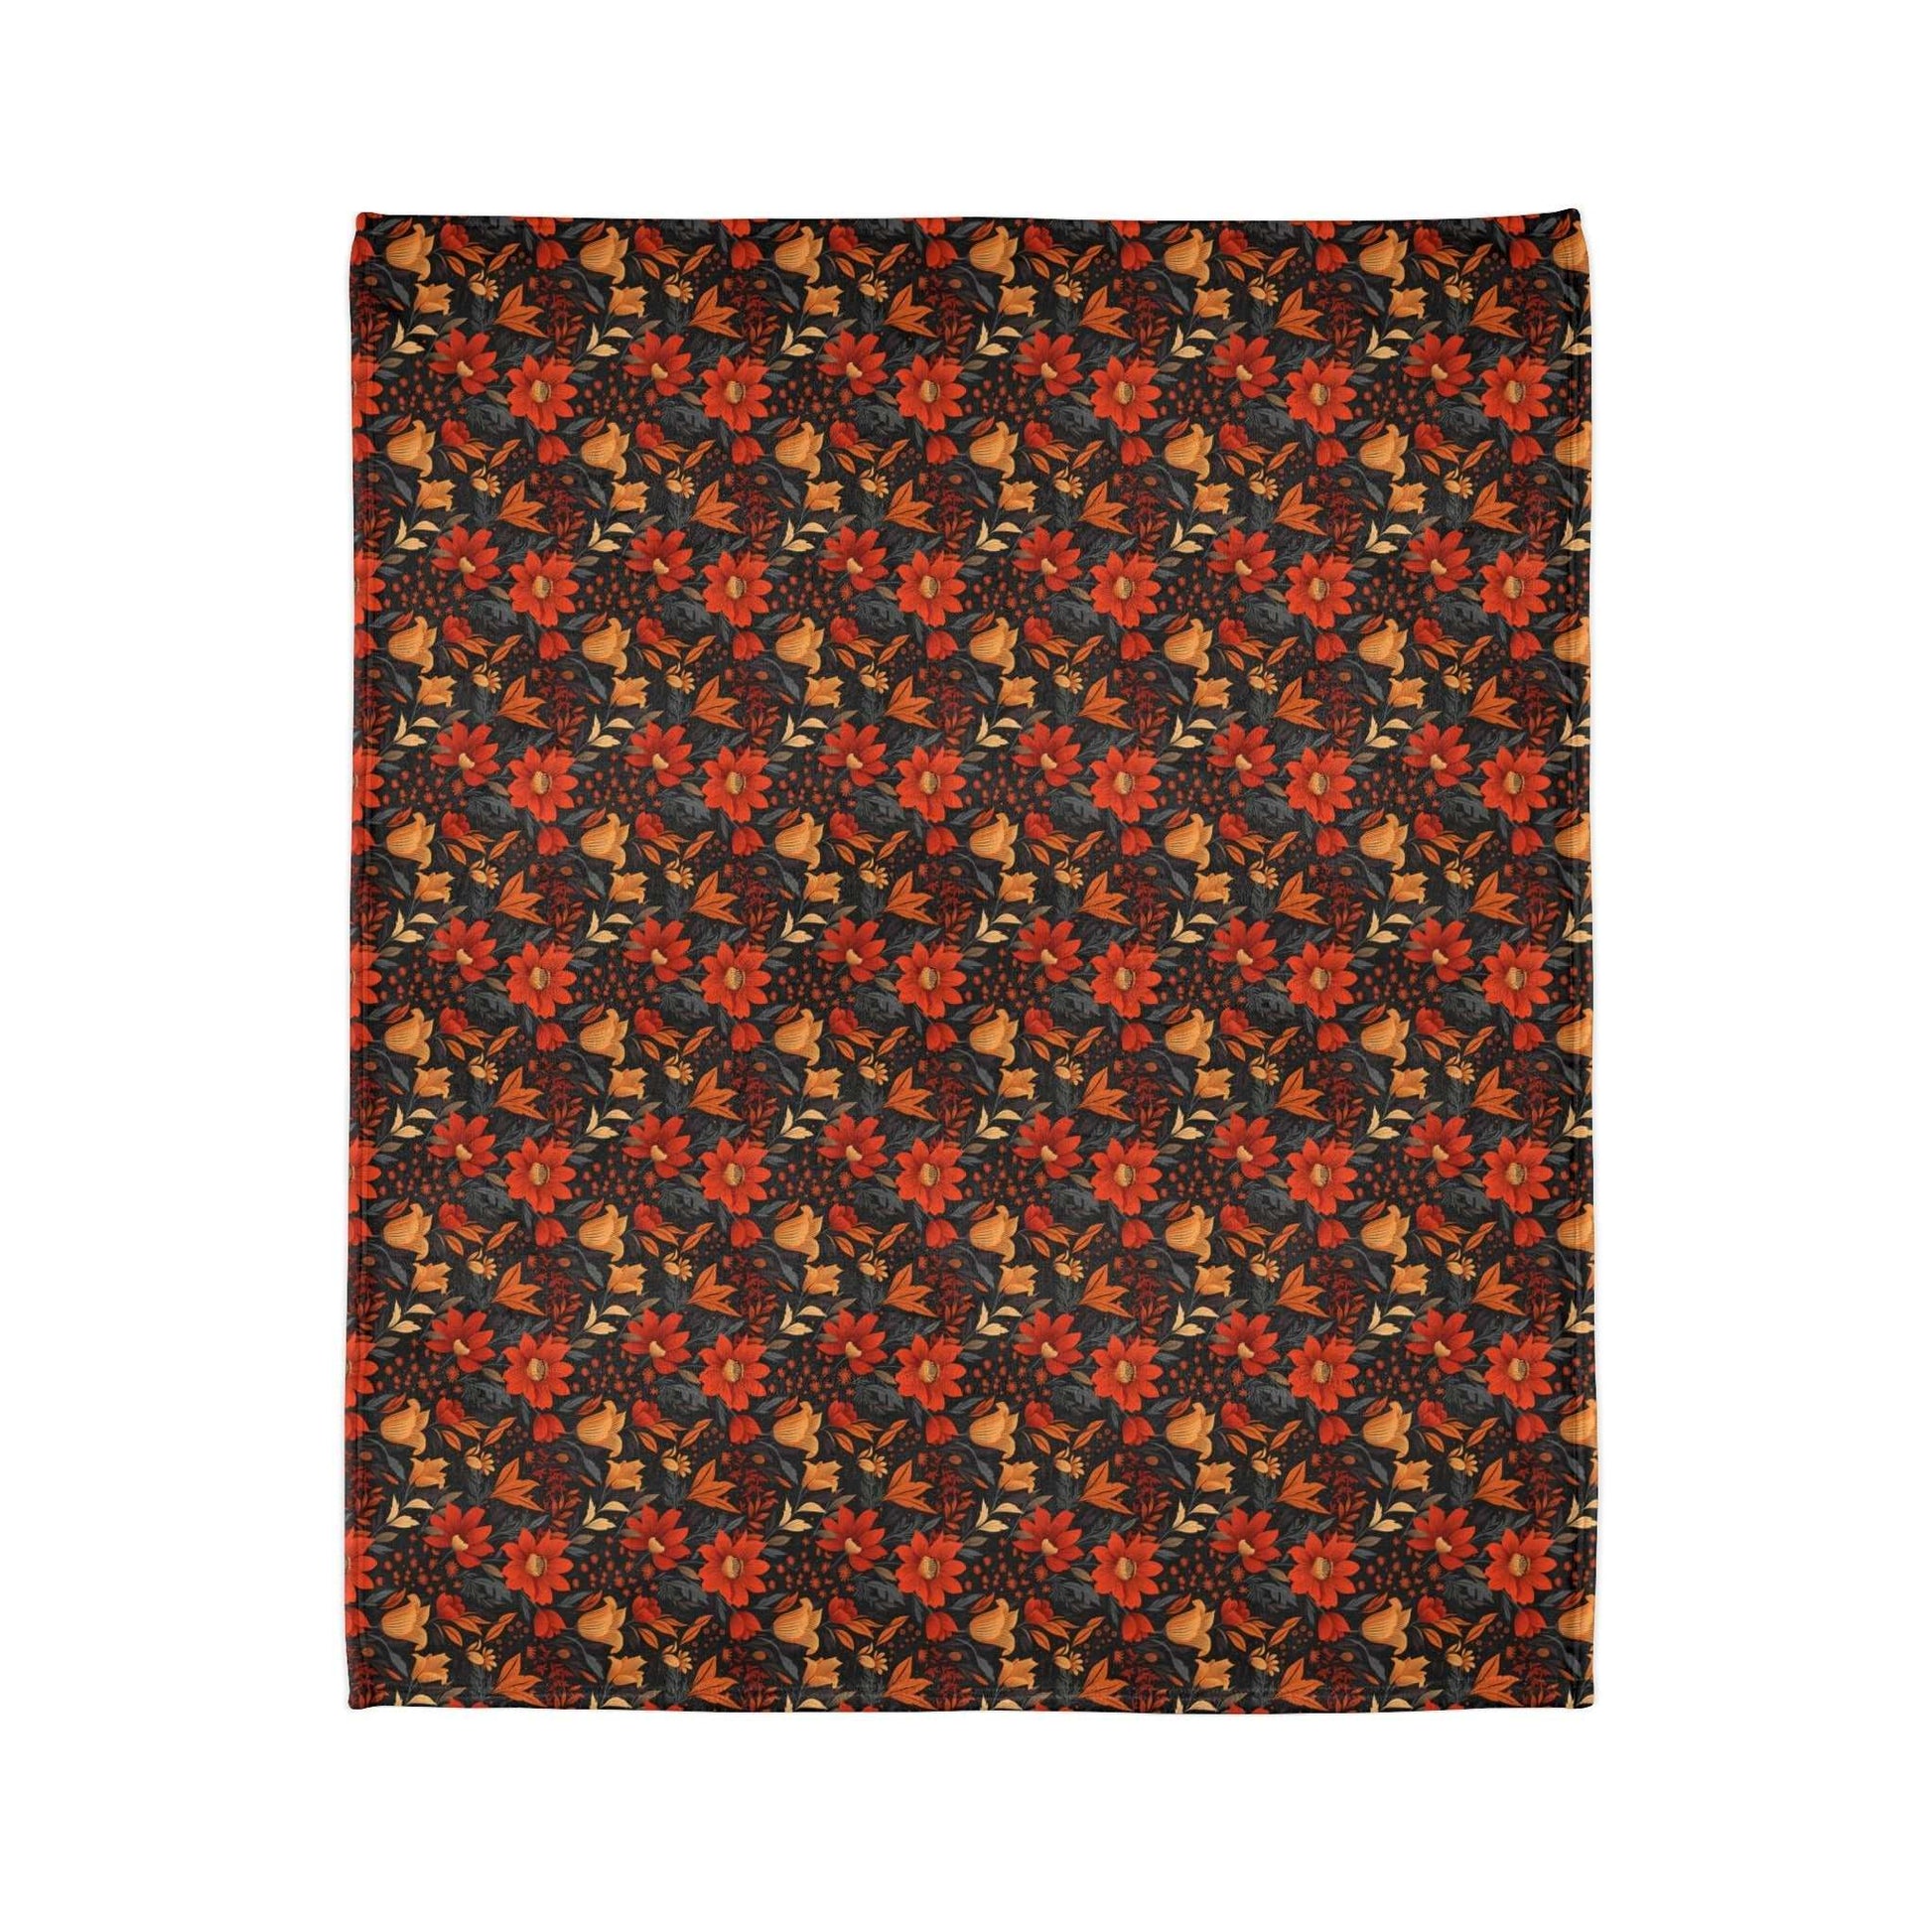 Autumn Blossom Noir: A Dark Floral Canvas - The Ideal Throw for Sofas - Pattern Symphony